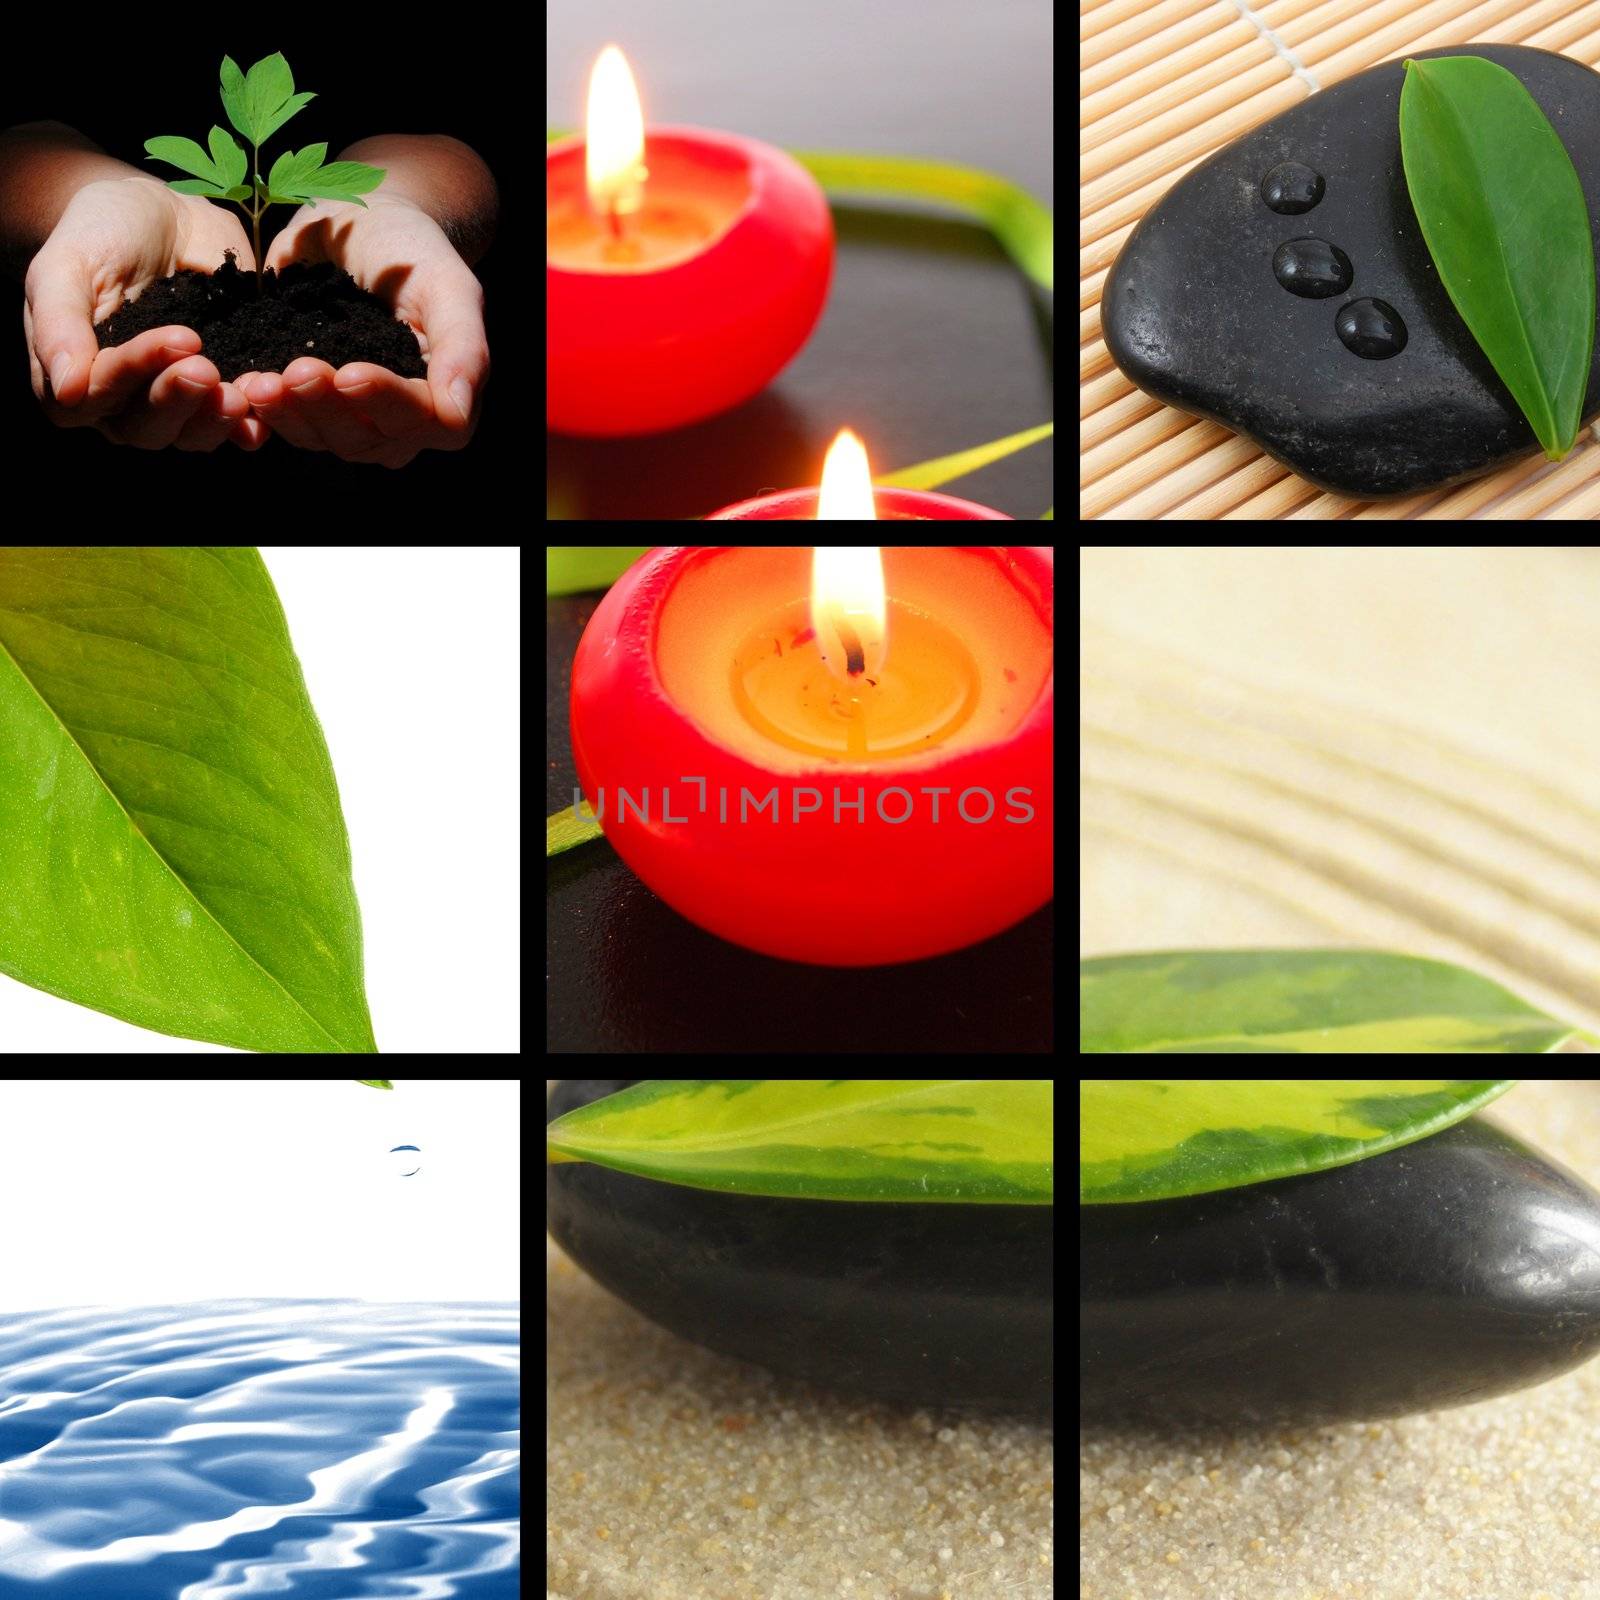 spa collage or collection with stone candle and water images